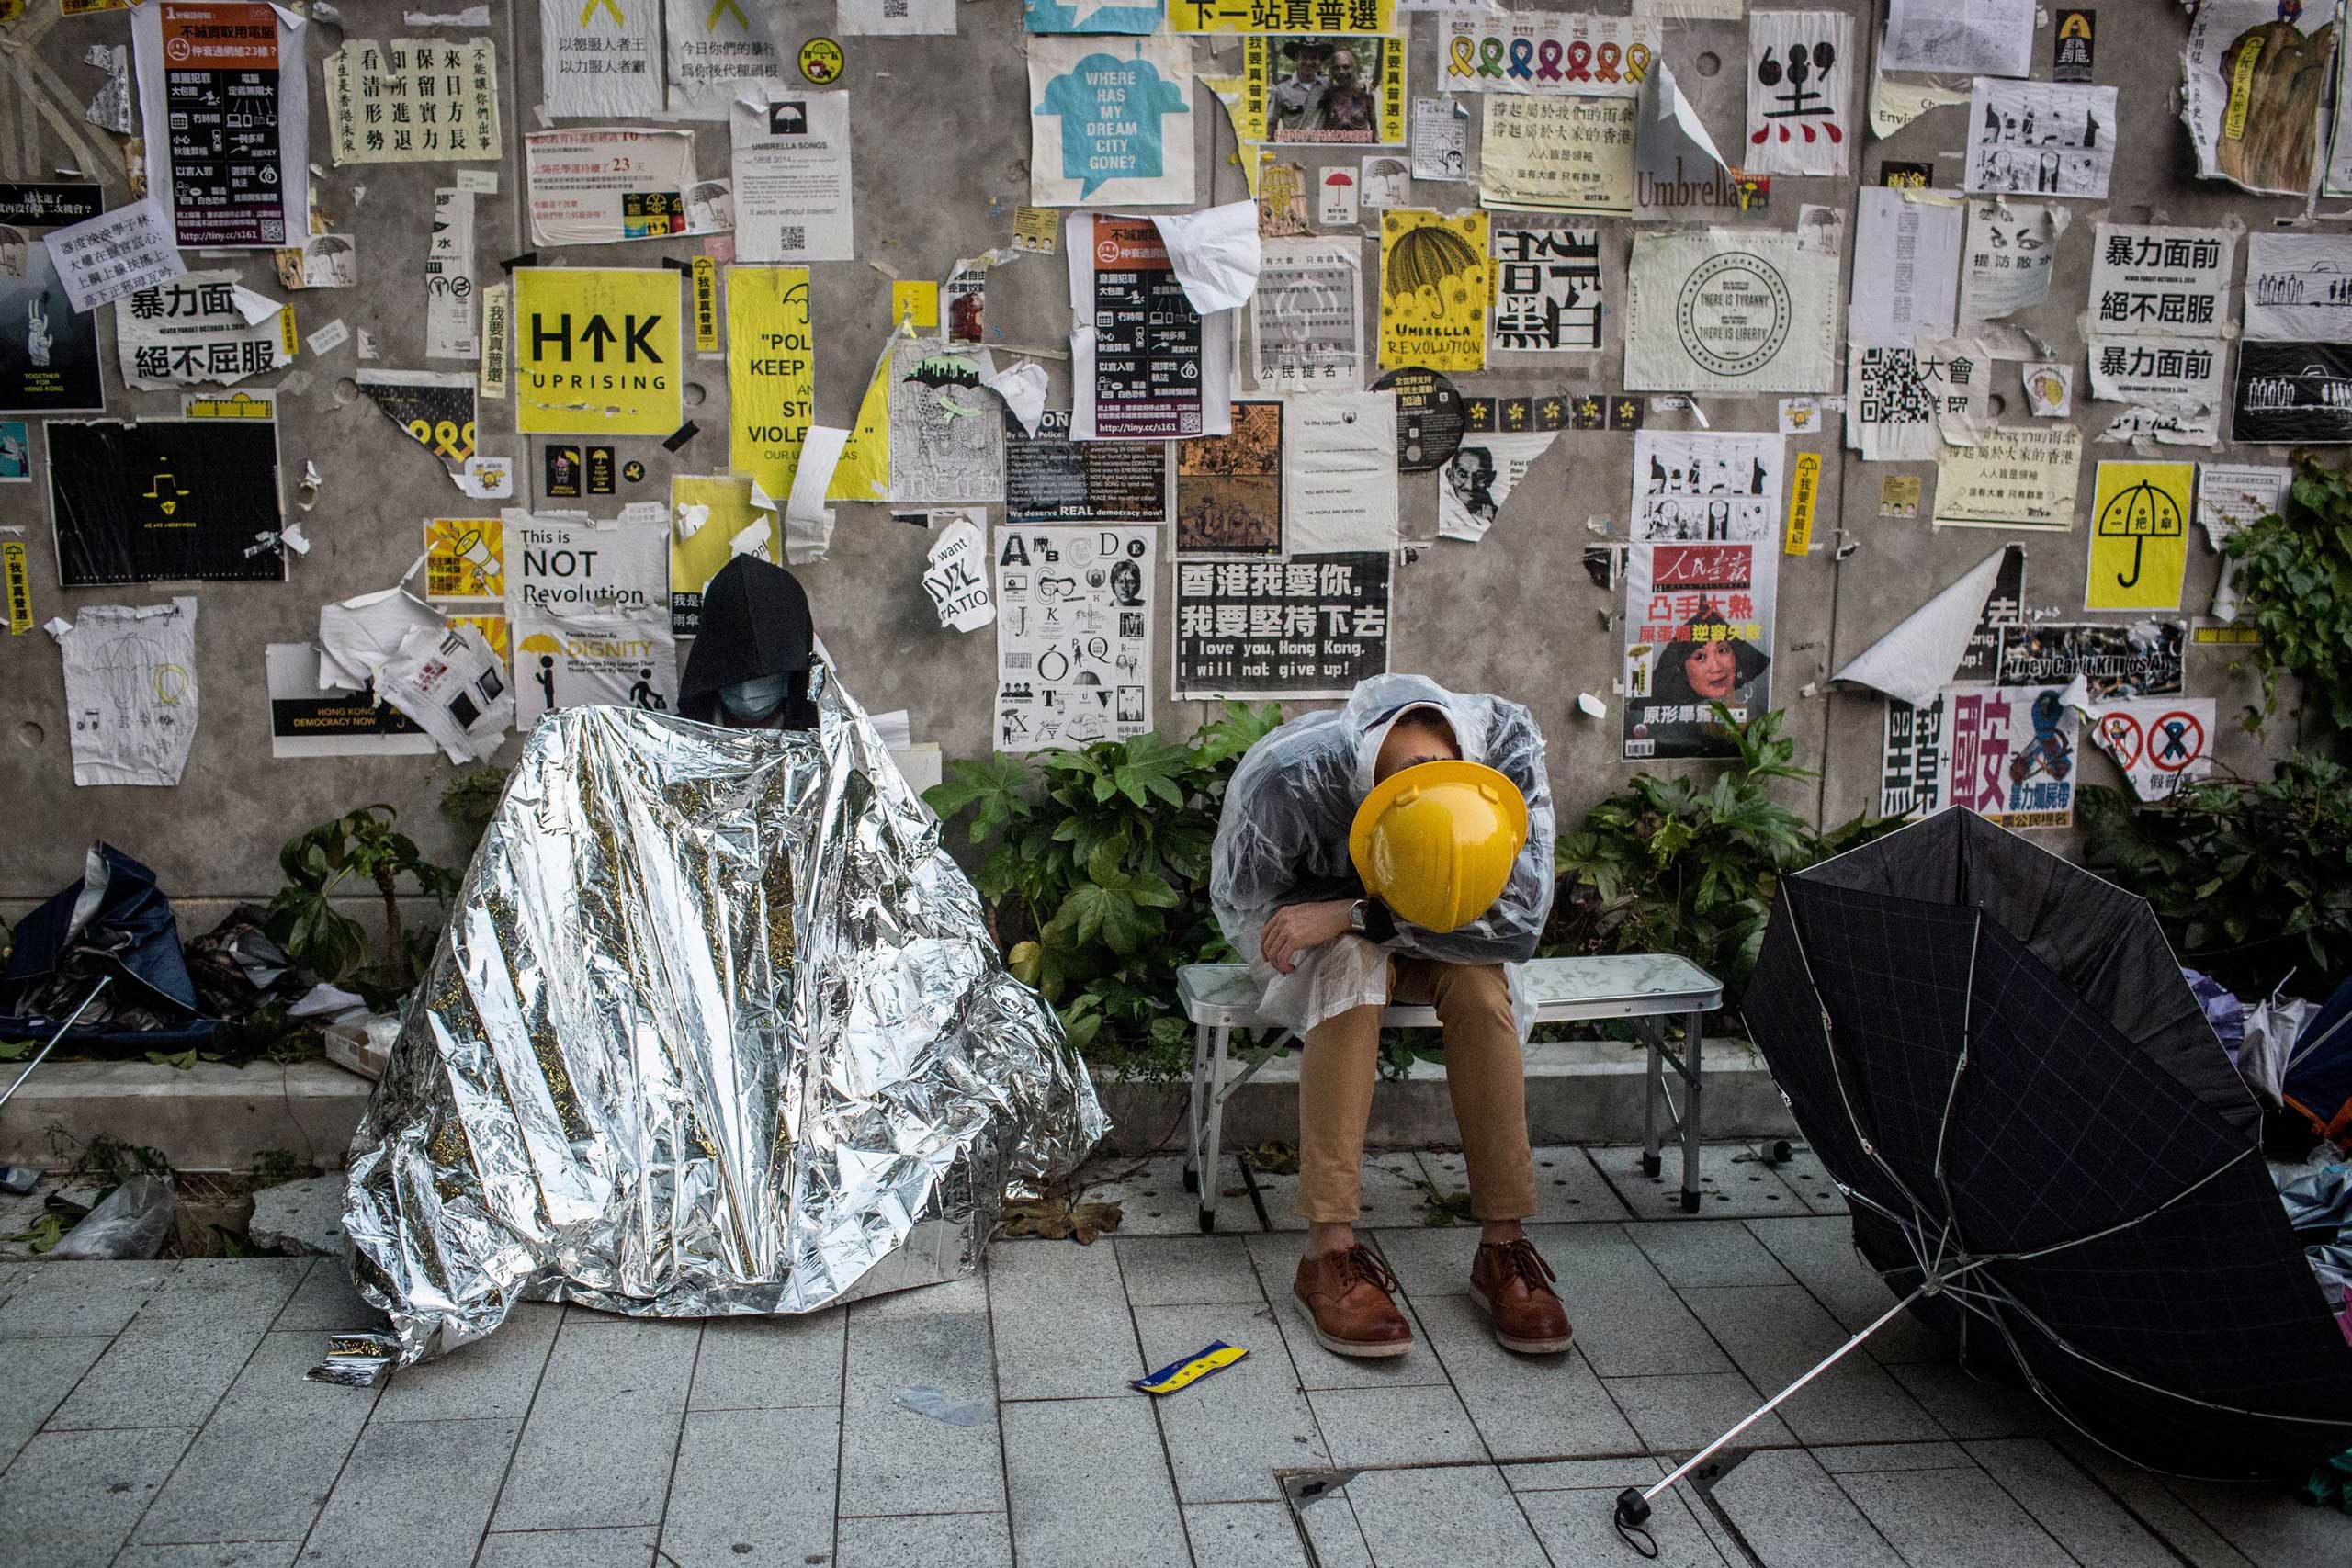 Pro-democracy activists sleep outside the Legislative Council building after protesters clashed with police on Nov. 19, 2014, in Hong Kong.